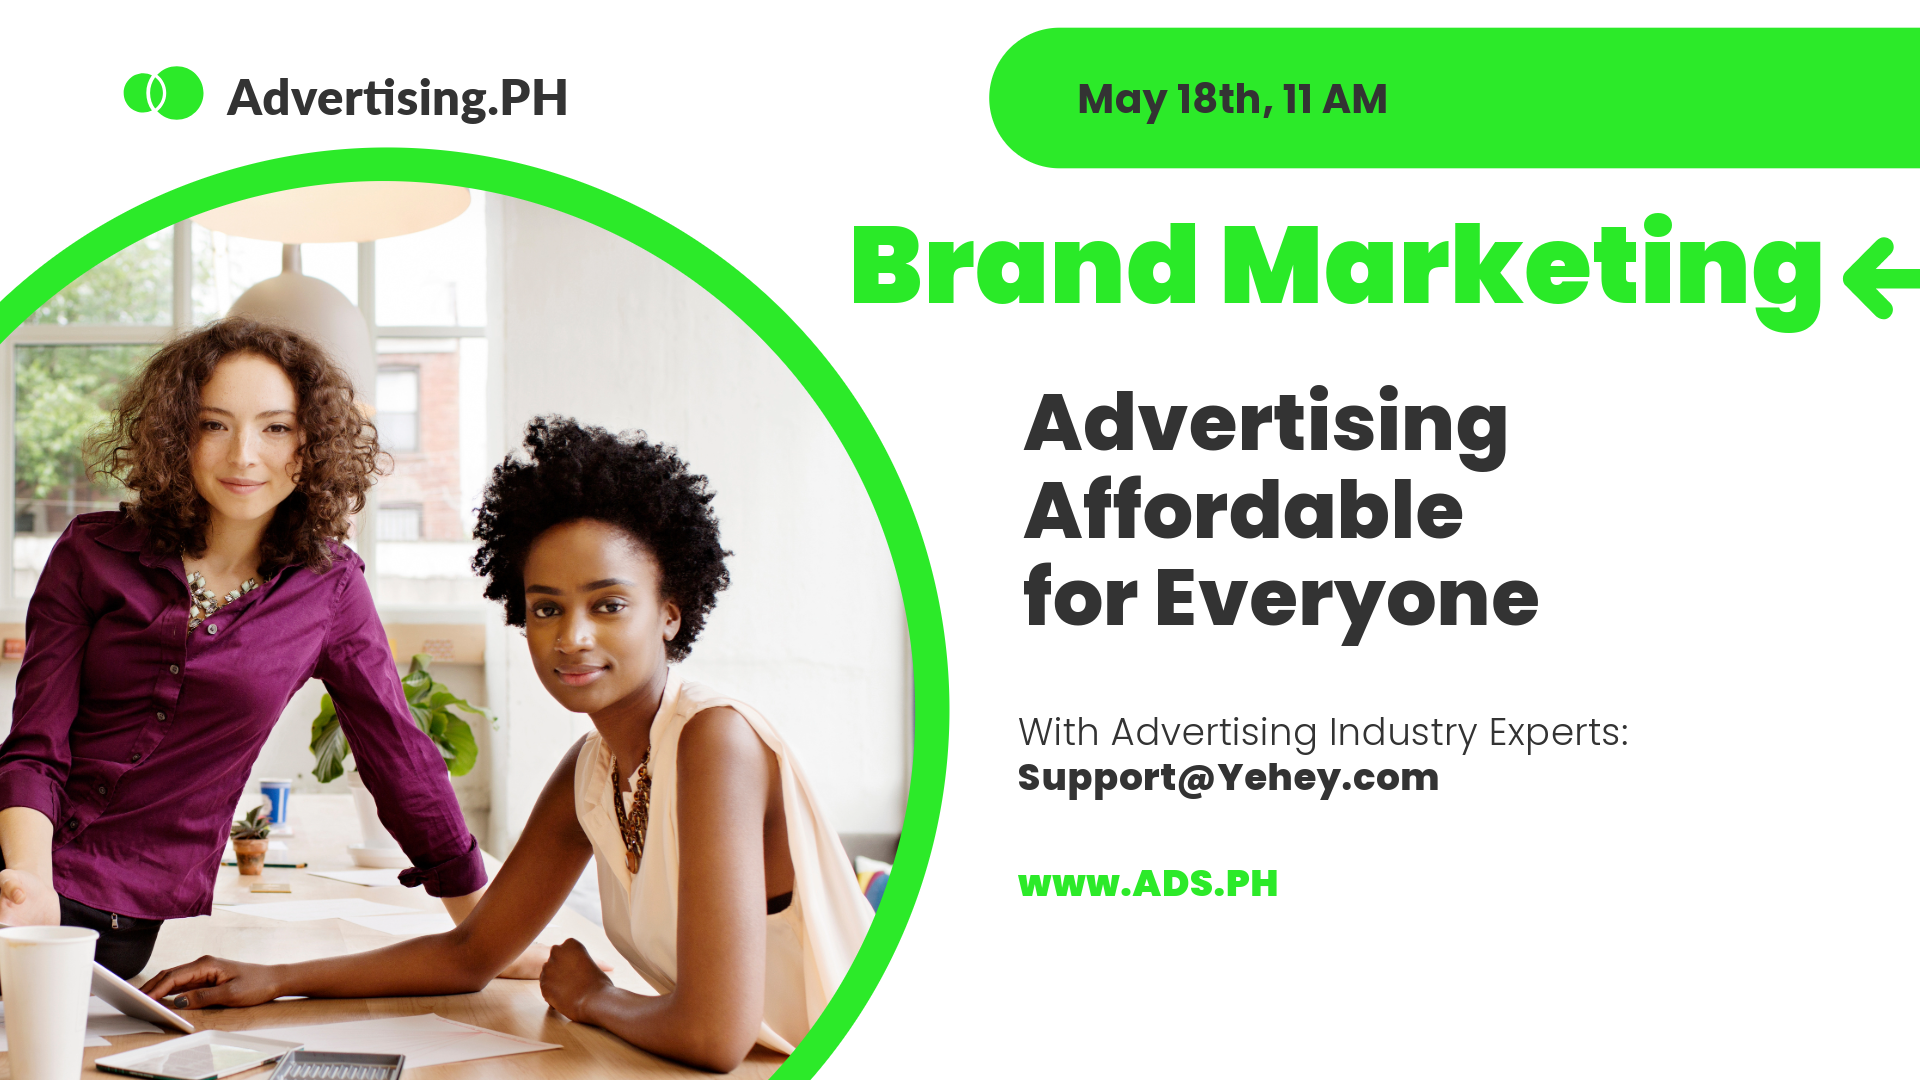 Ads.PH Makes Advertising Affordable for Everyone with Just $2 Minimum Fee